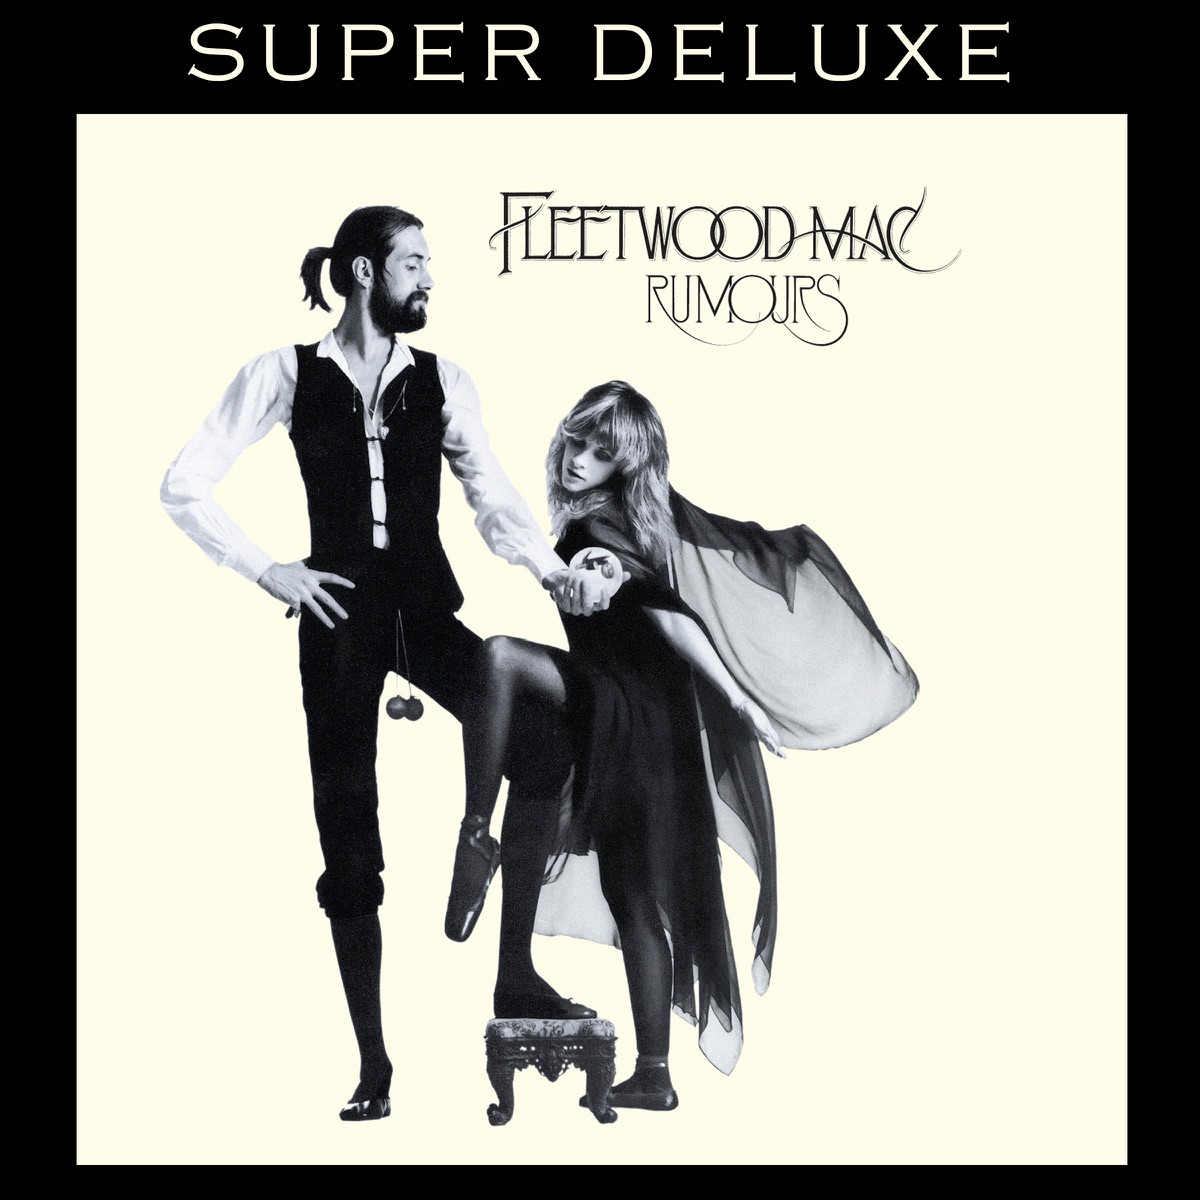 Stevie Nicks and Mick Fleetwood on the cover of Fleetwood Mac’s “Rumors” album